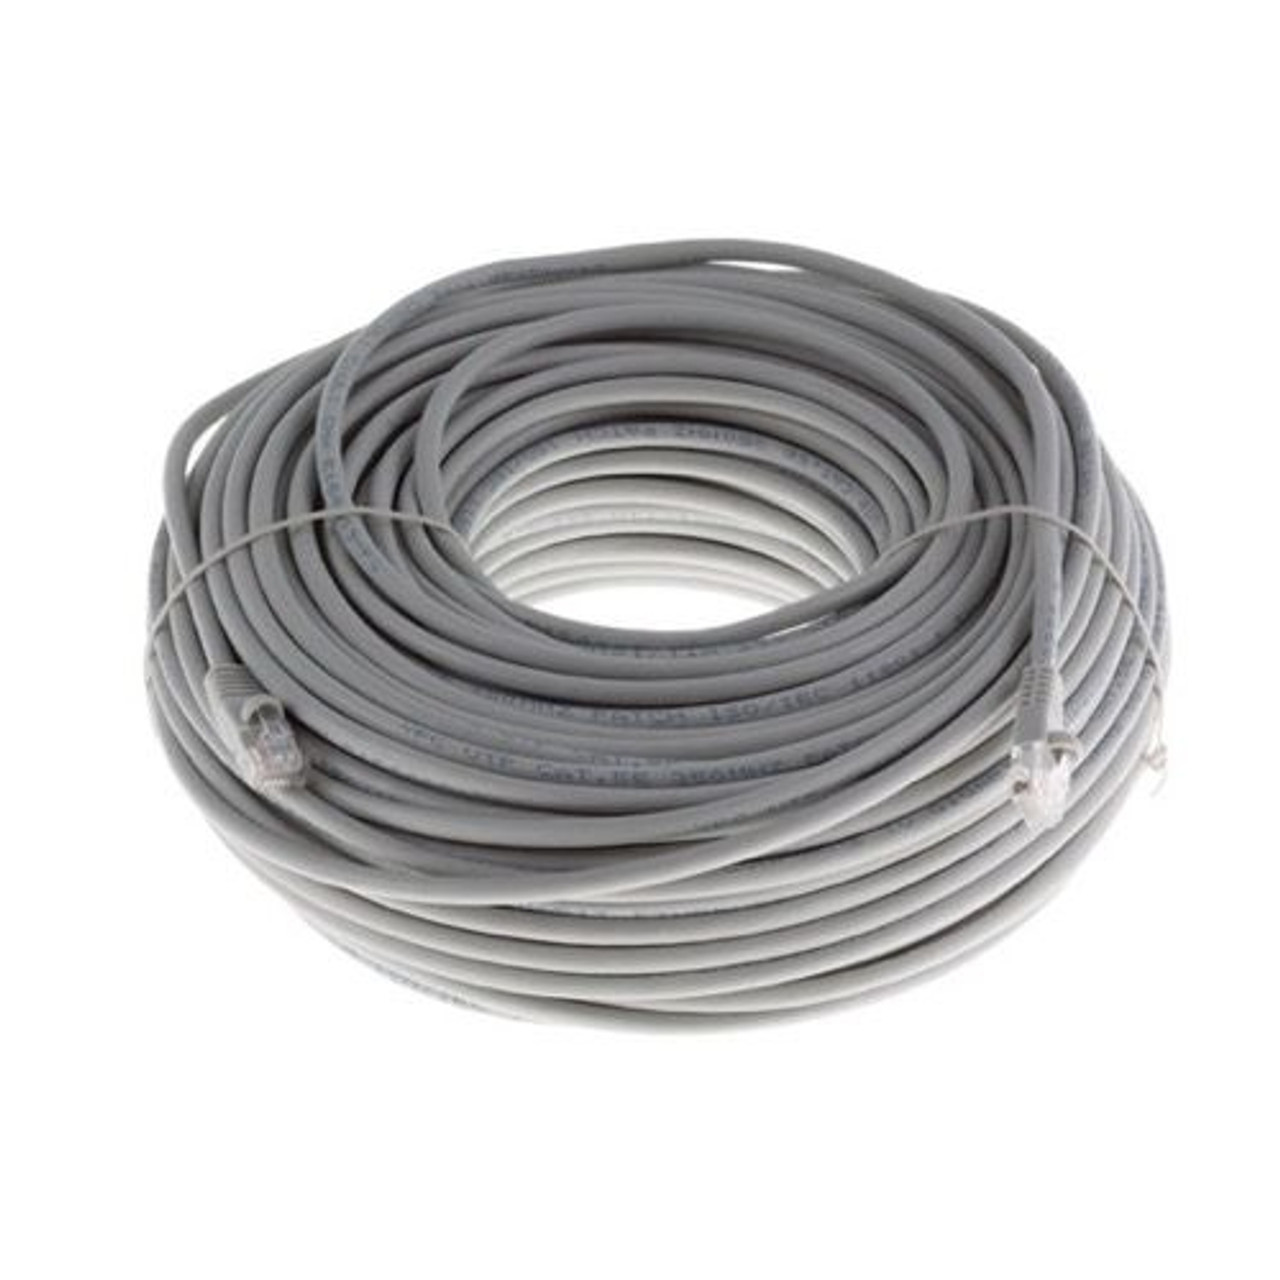 Eagle 50' FT CAT6 Patch Cable Gray Snagless 24 AWG Copper 550 MHz RJ45 23 AWG Copper Each End Gold Network Booted High Performance Data Fast Media 550 MHz RJ-45 Category 6 High Speed Ethernet Data Gaming Jumper